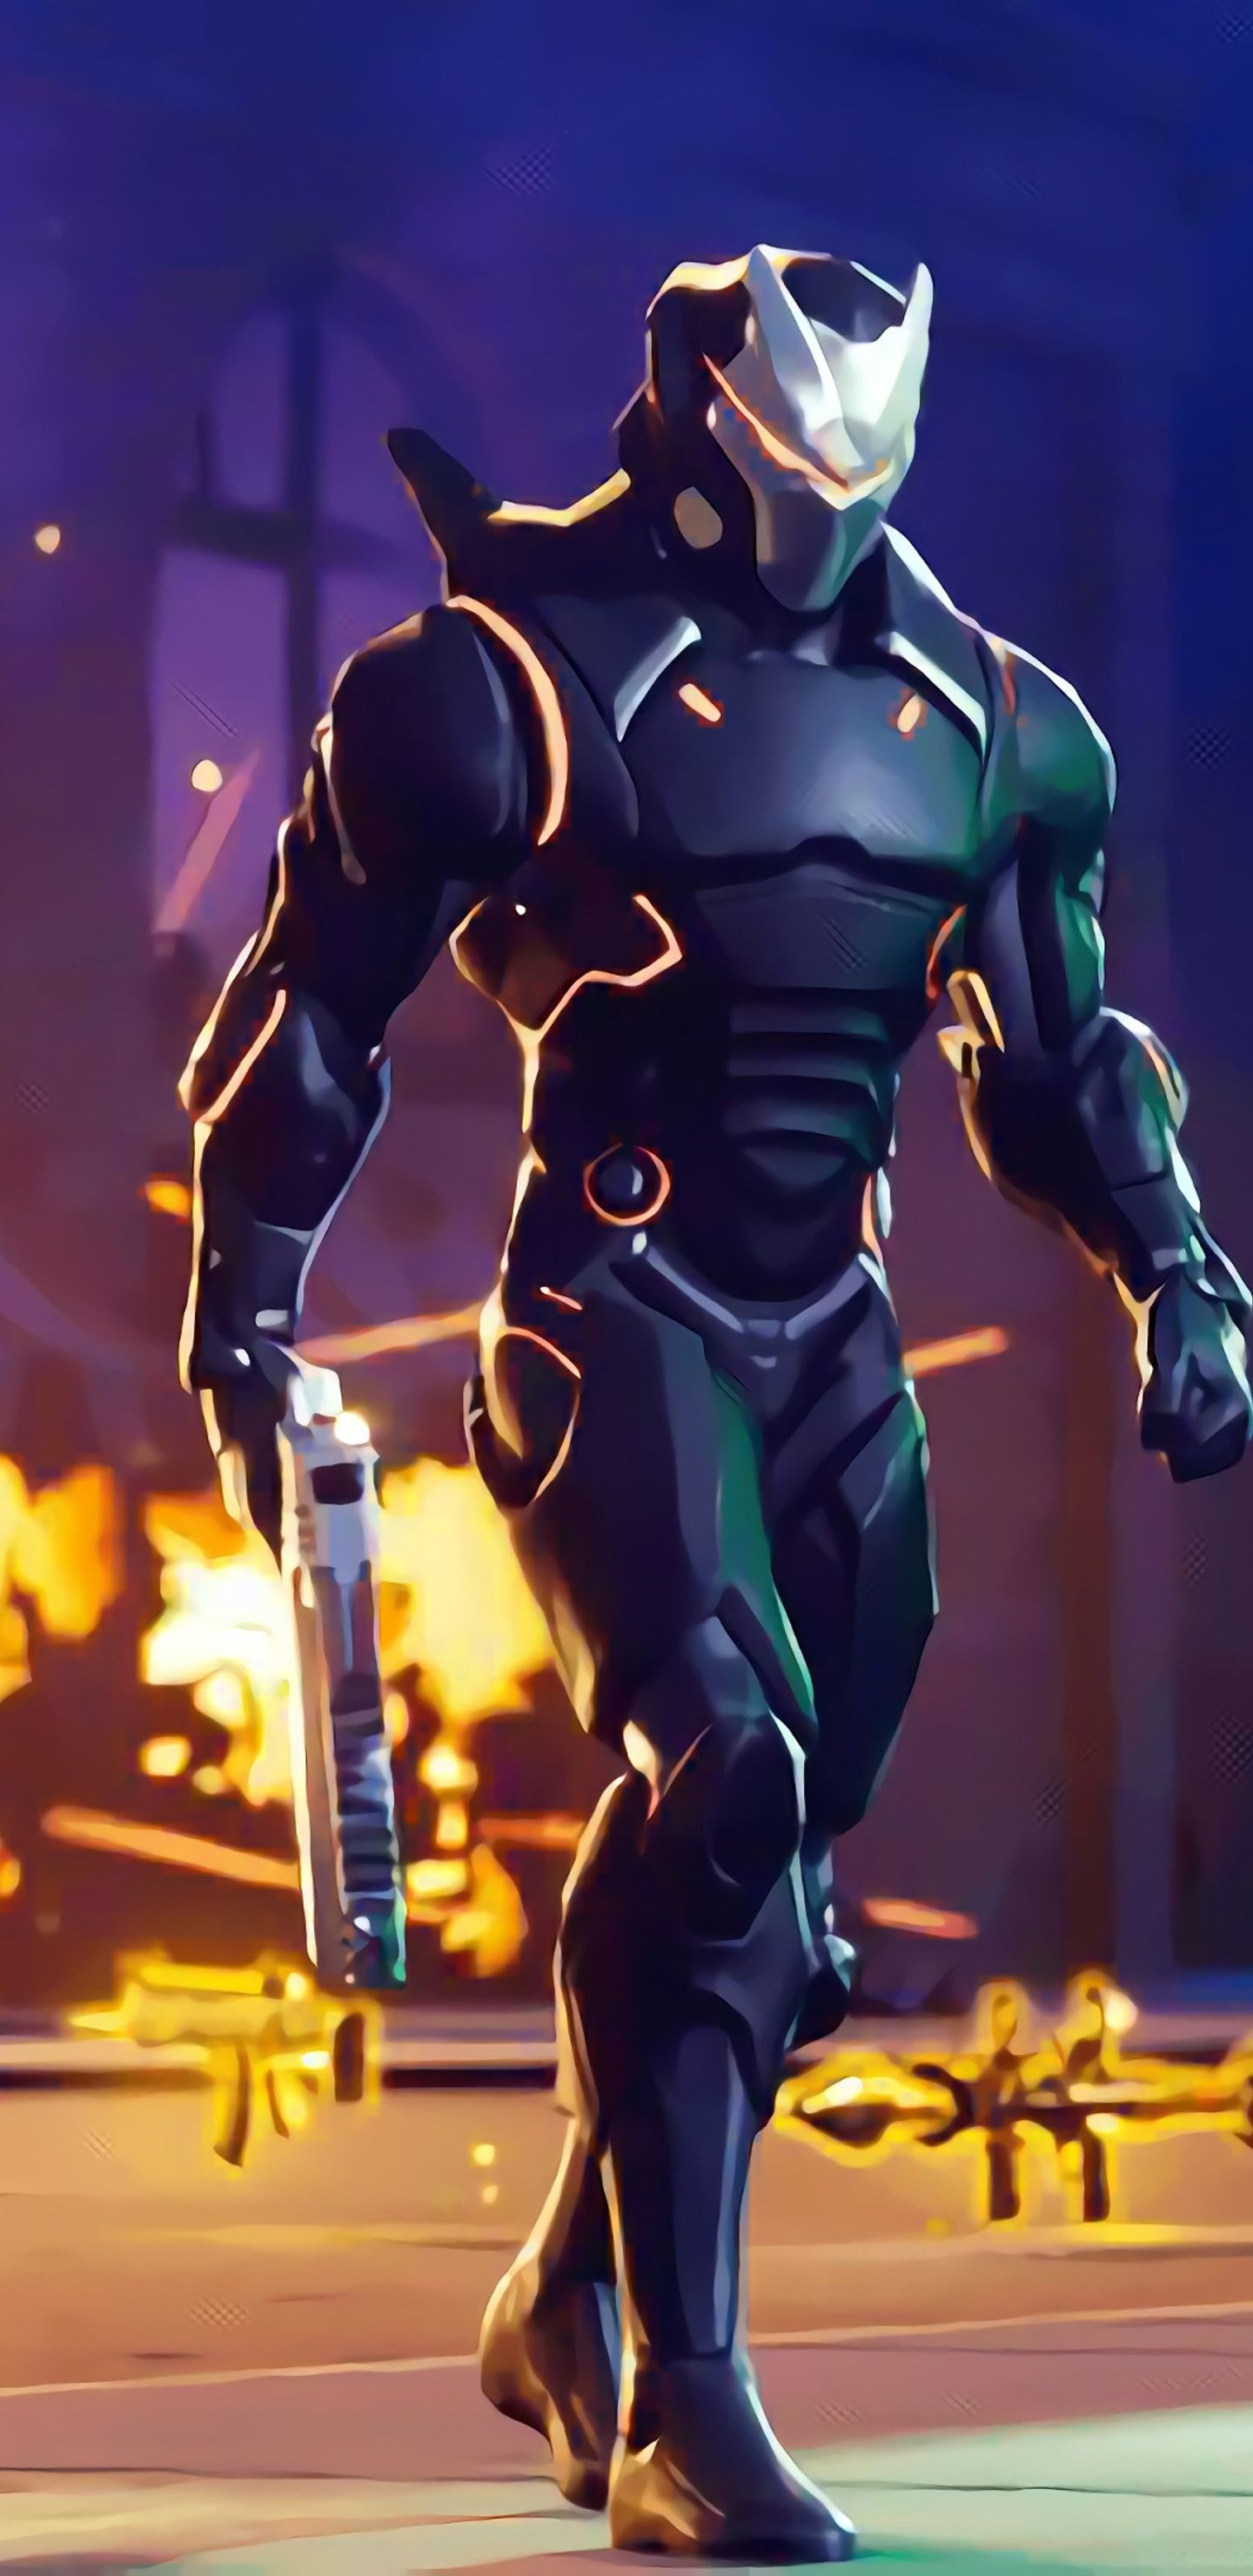 Epic Games, Gaming industry, Raven skin Fortnite, Stunning iPhone wallpapers, 1440x2960 HD Phone